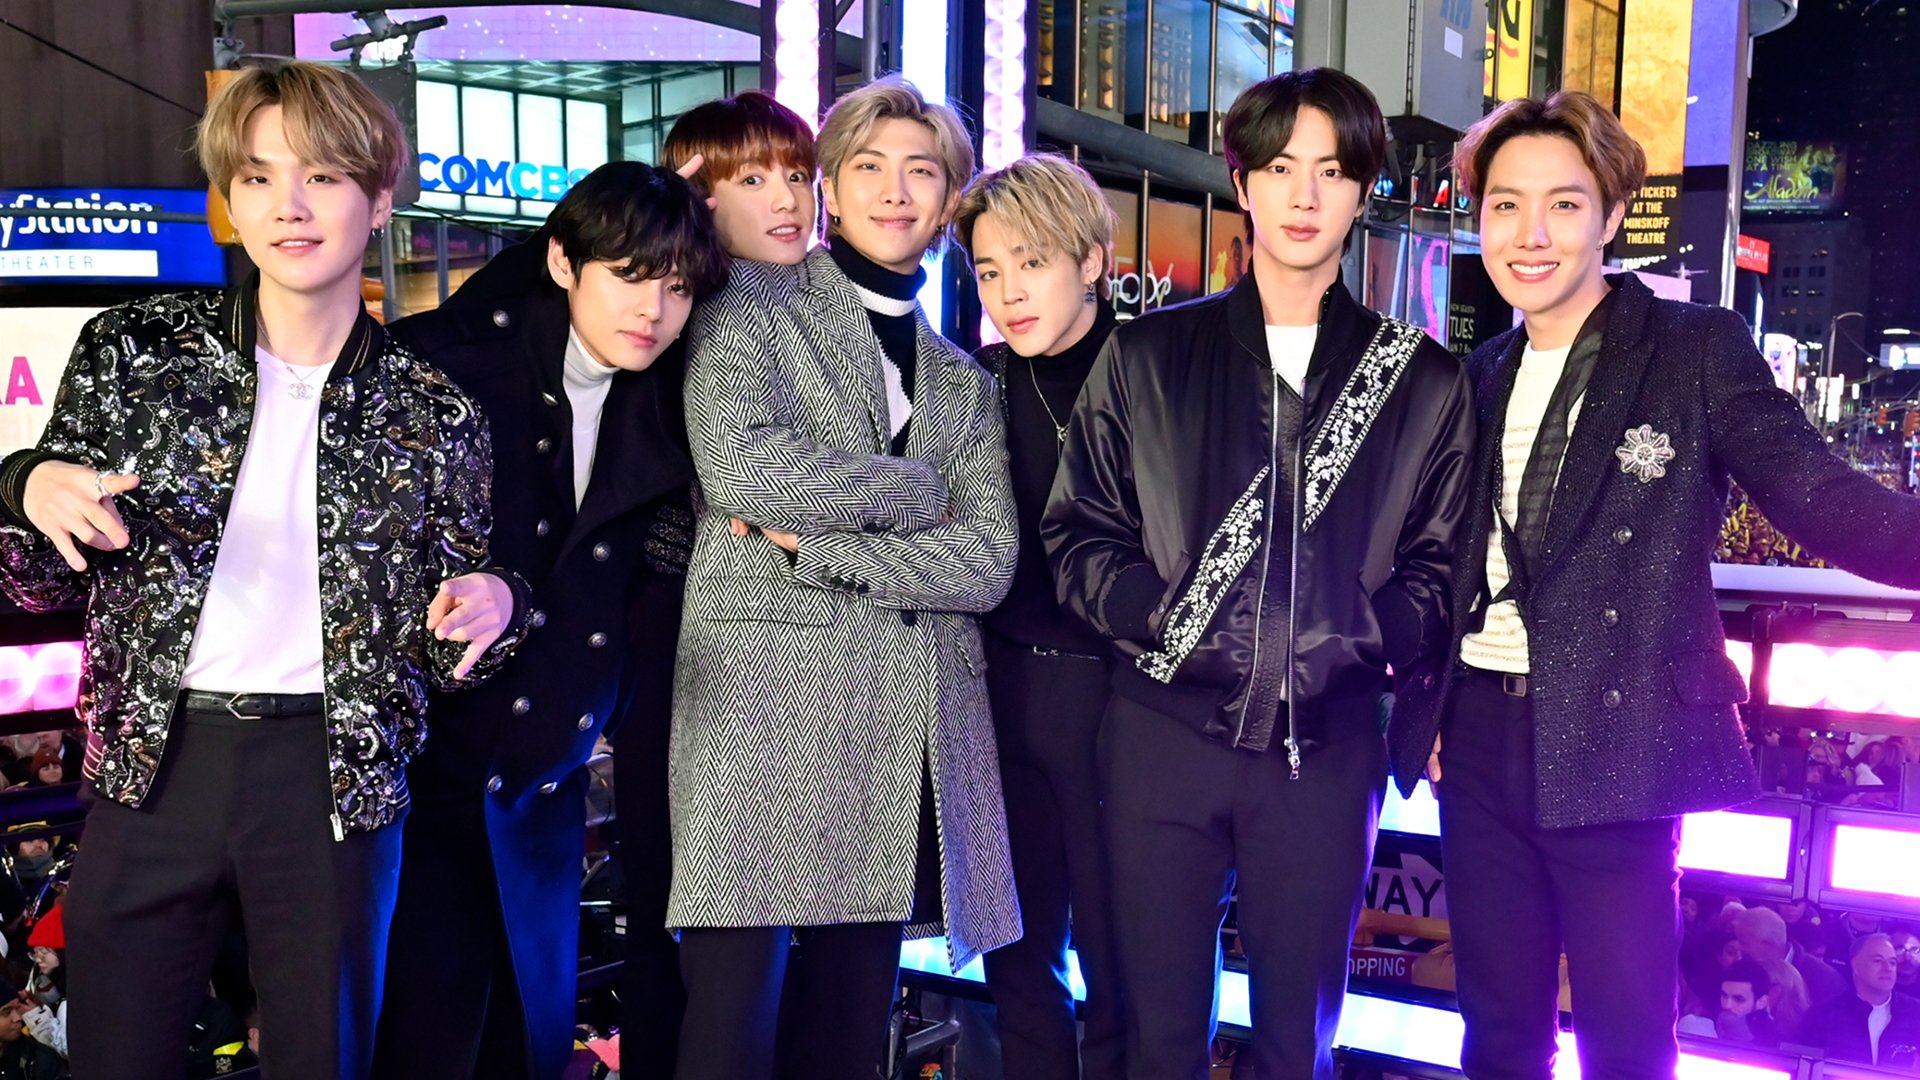 BTS at Dick Clark's New Year's Rockin' Eve with Ryan Seacrest 2020